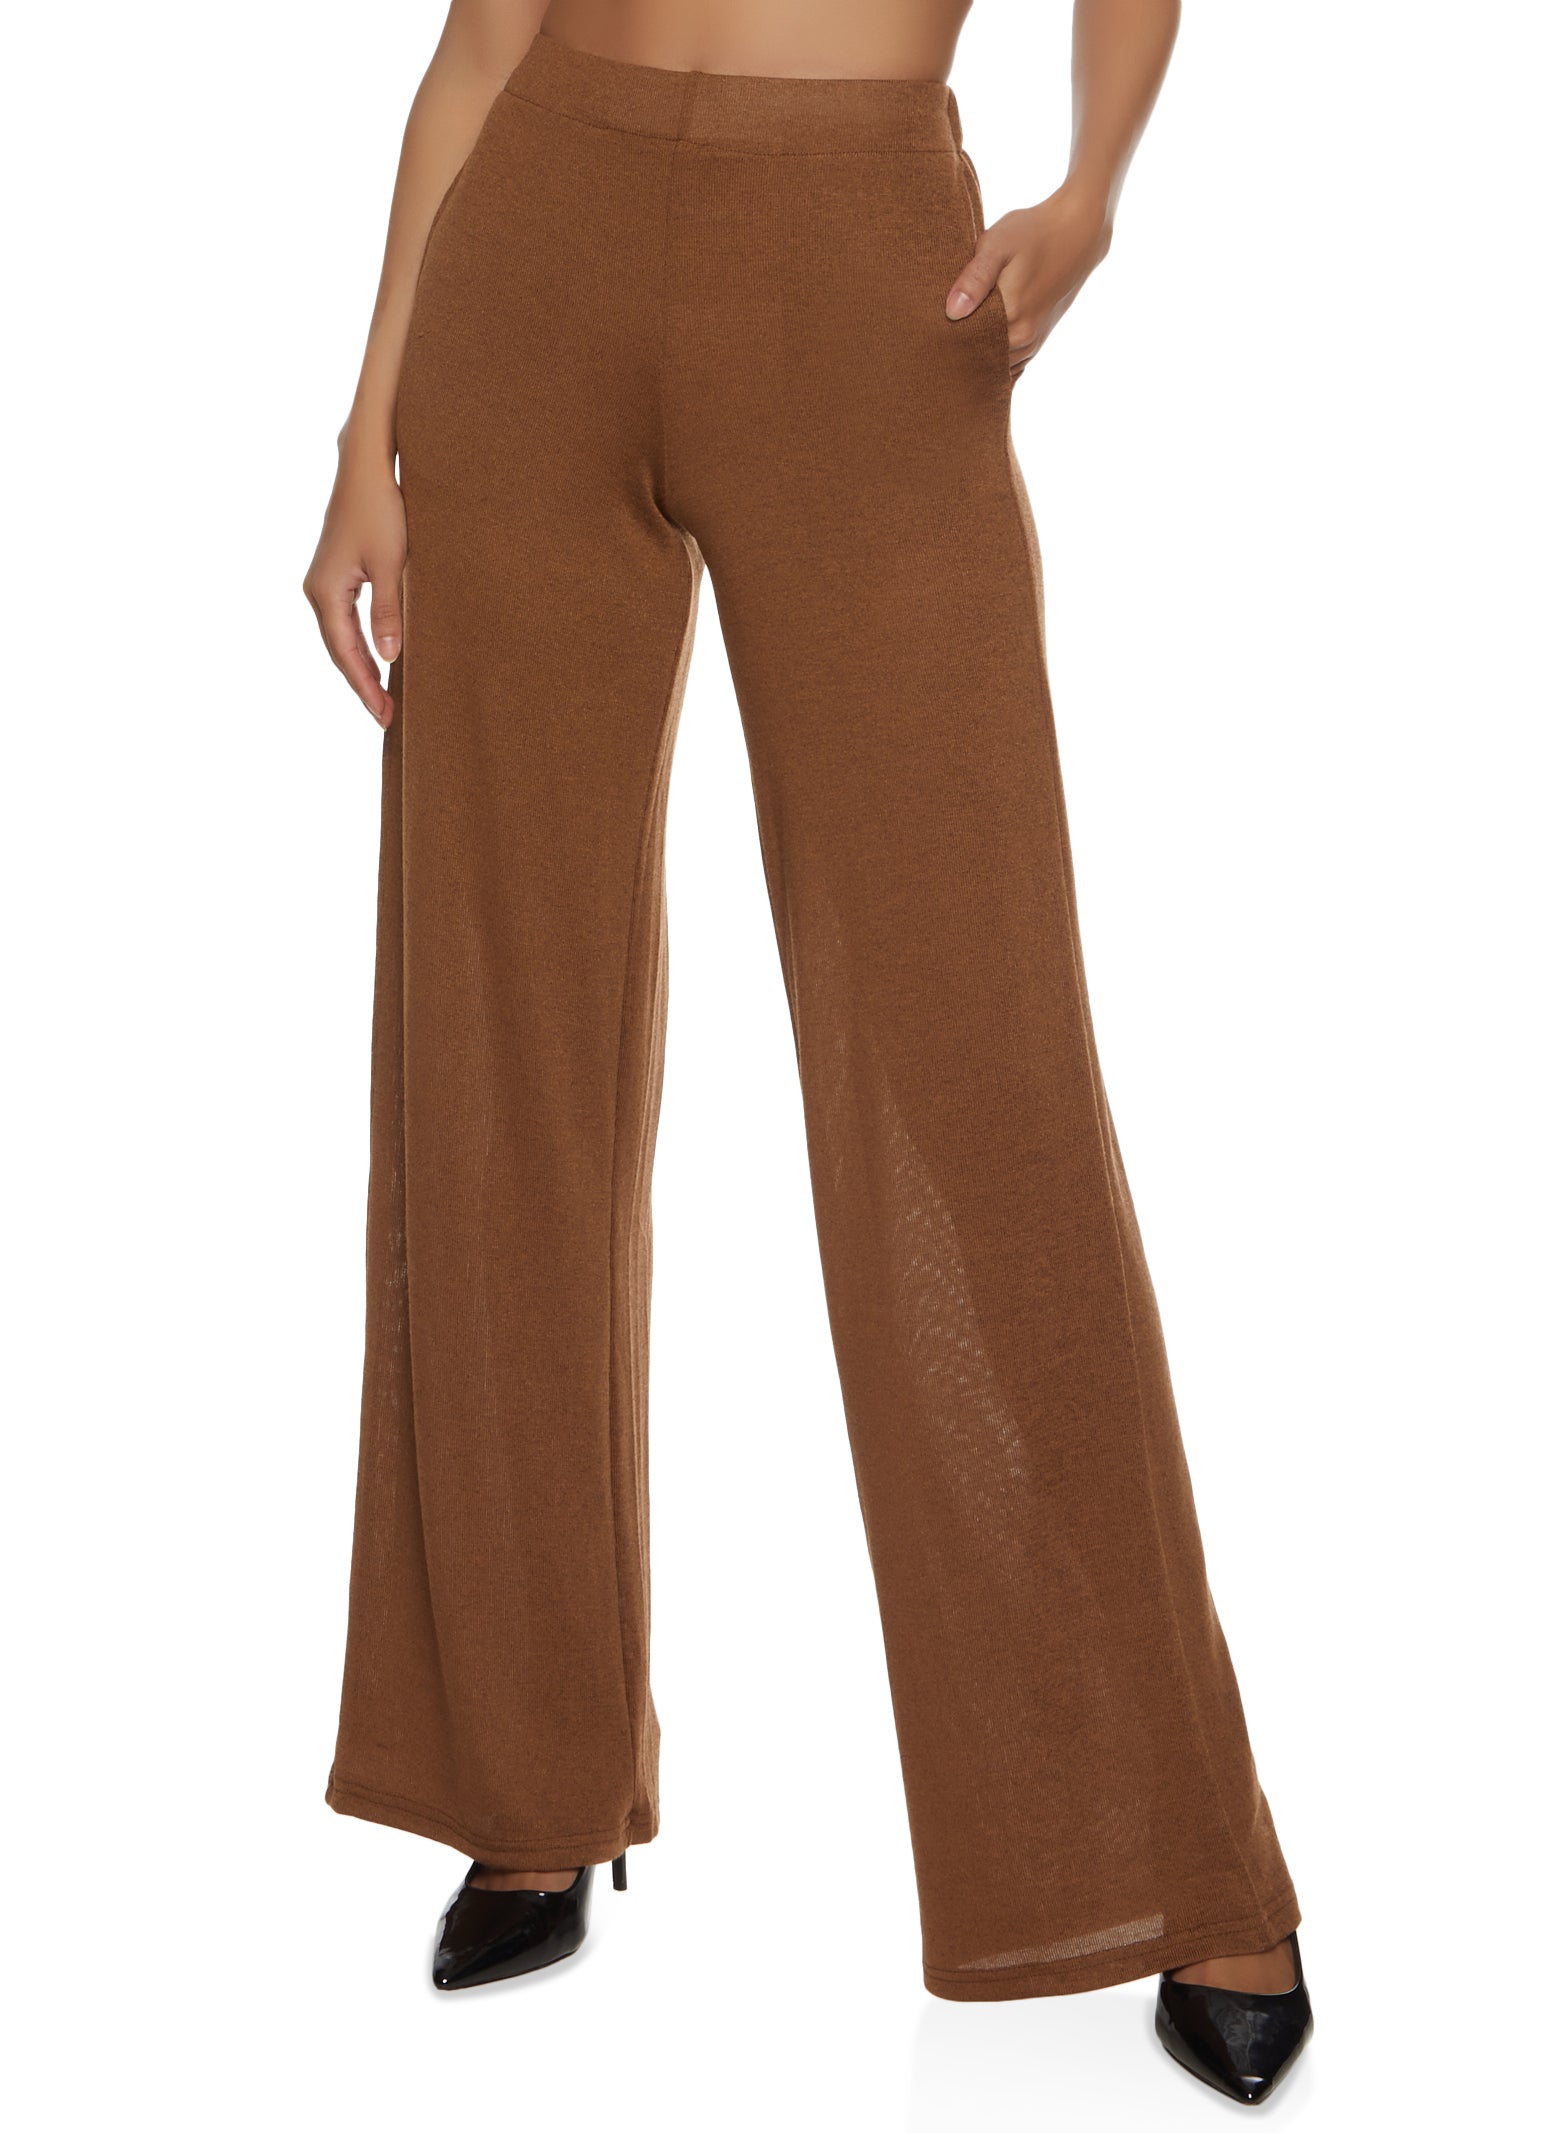 Womens Daisy Solid Brushed Knit High Waisted Wide Leg Pants,